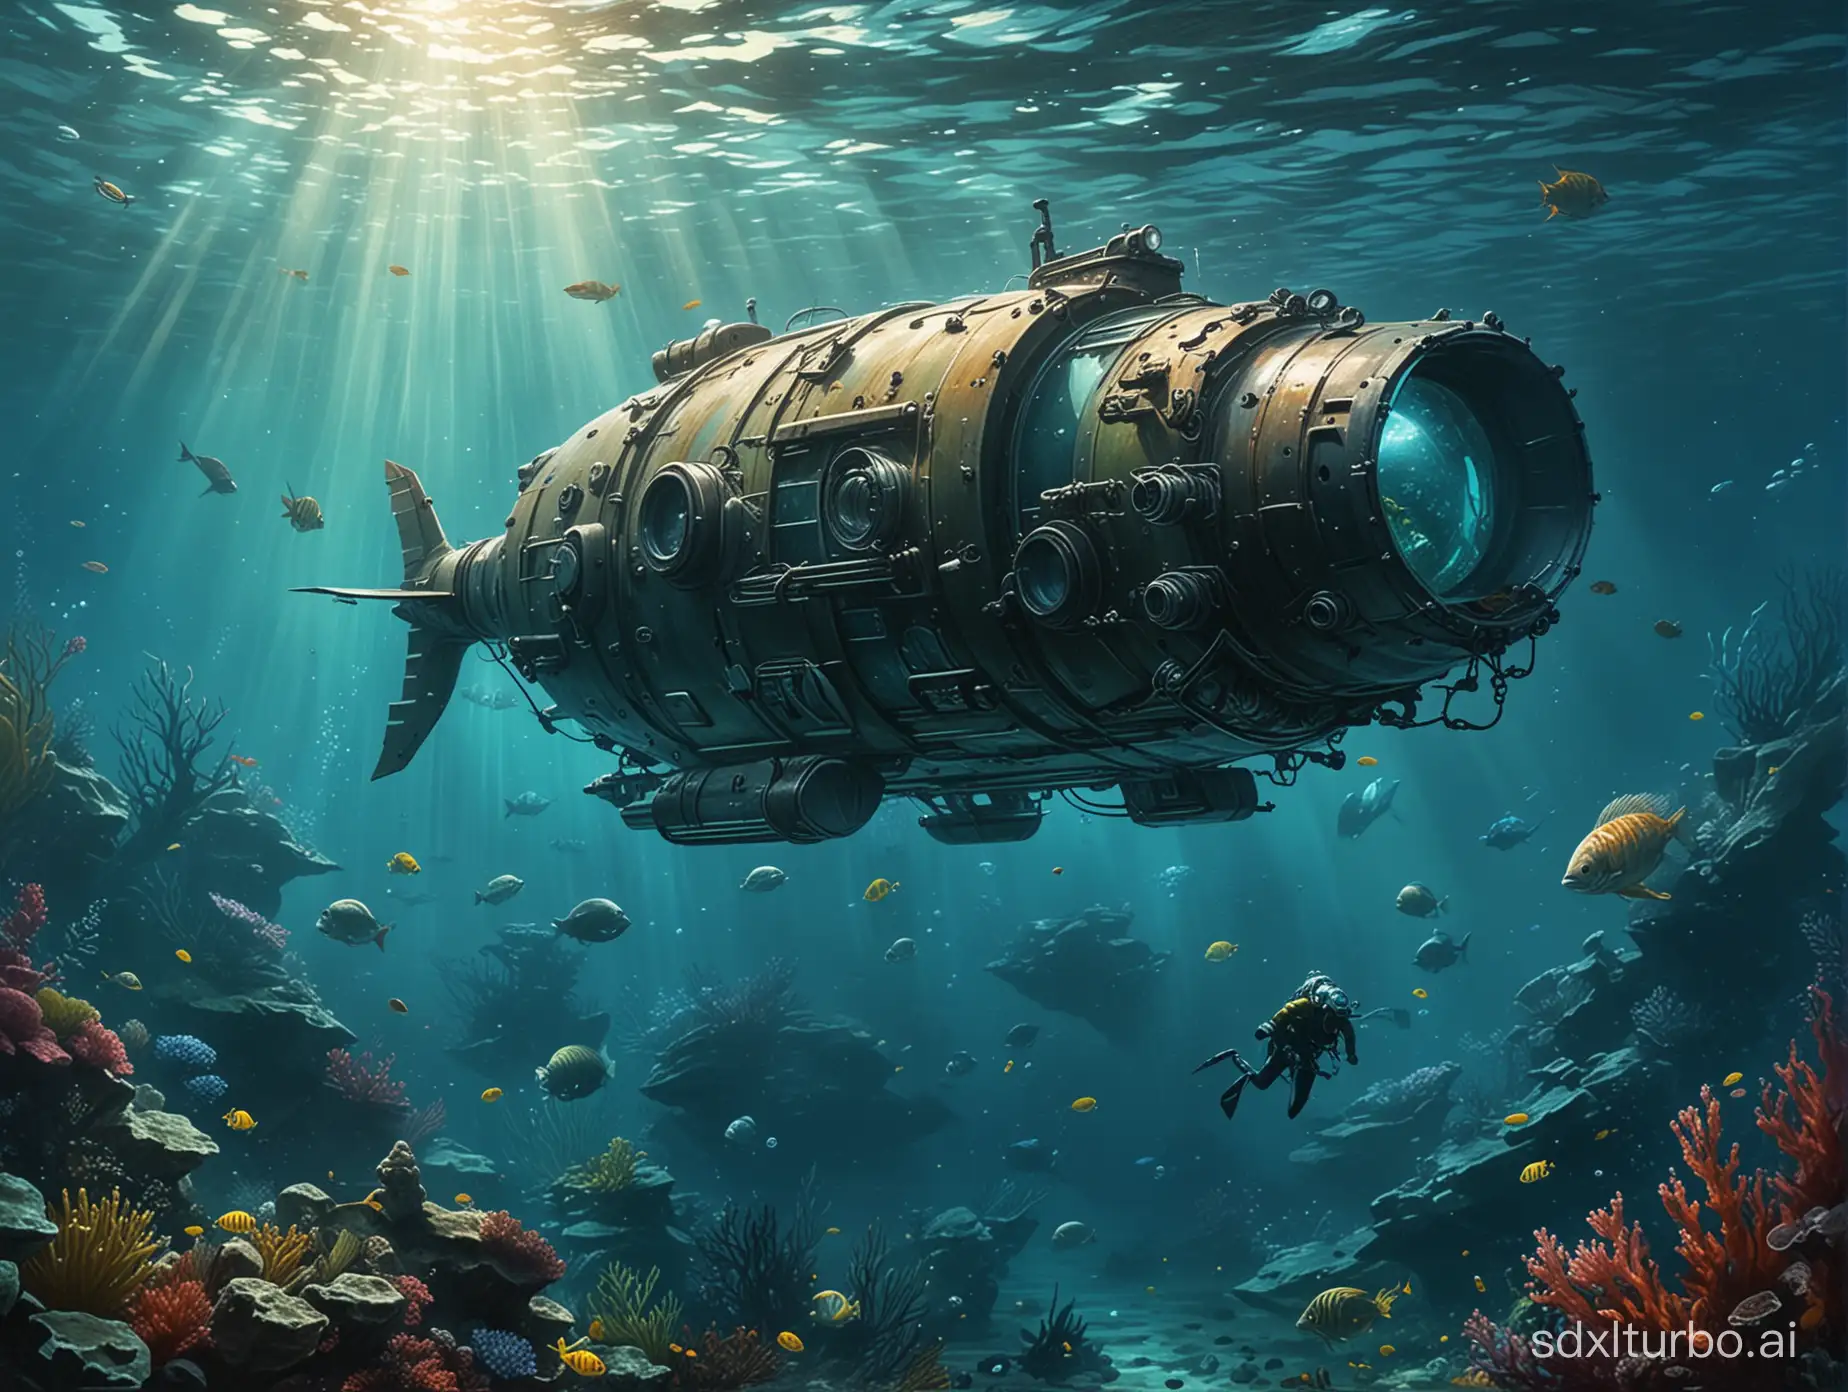 Futuristic-Underwater-Cityscape-in-Science-Fiction-Painting